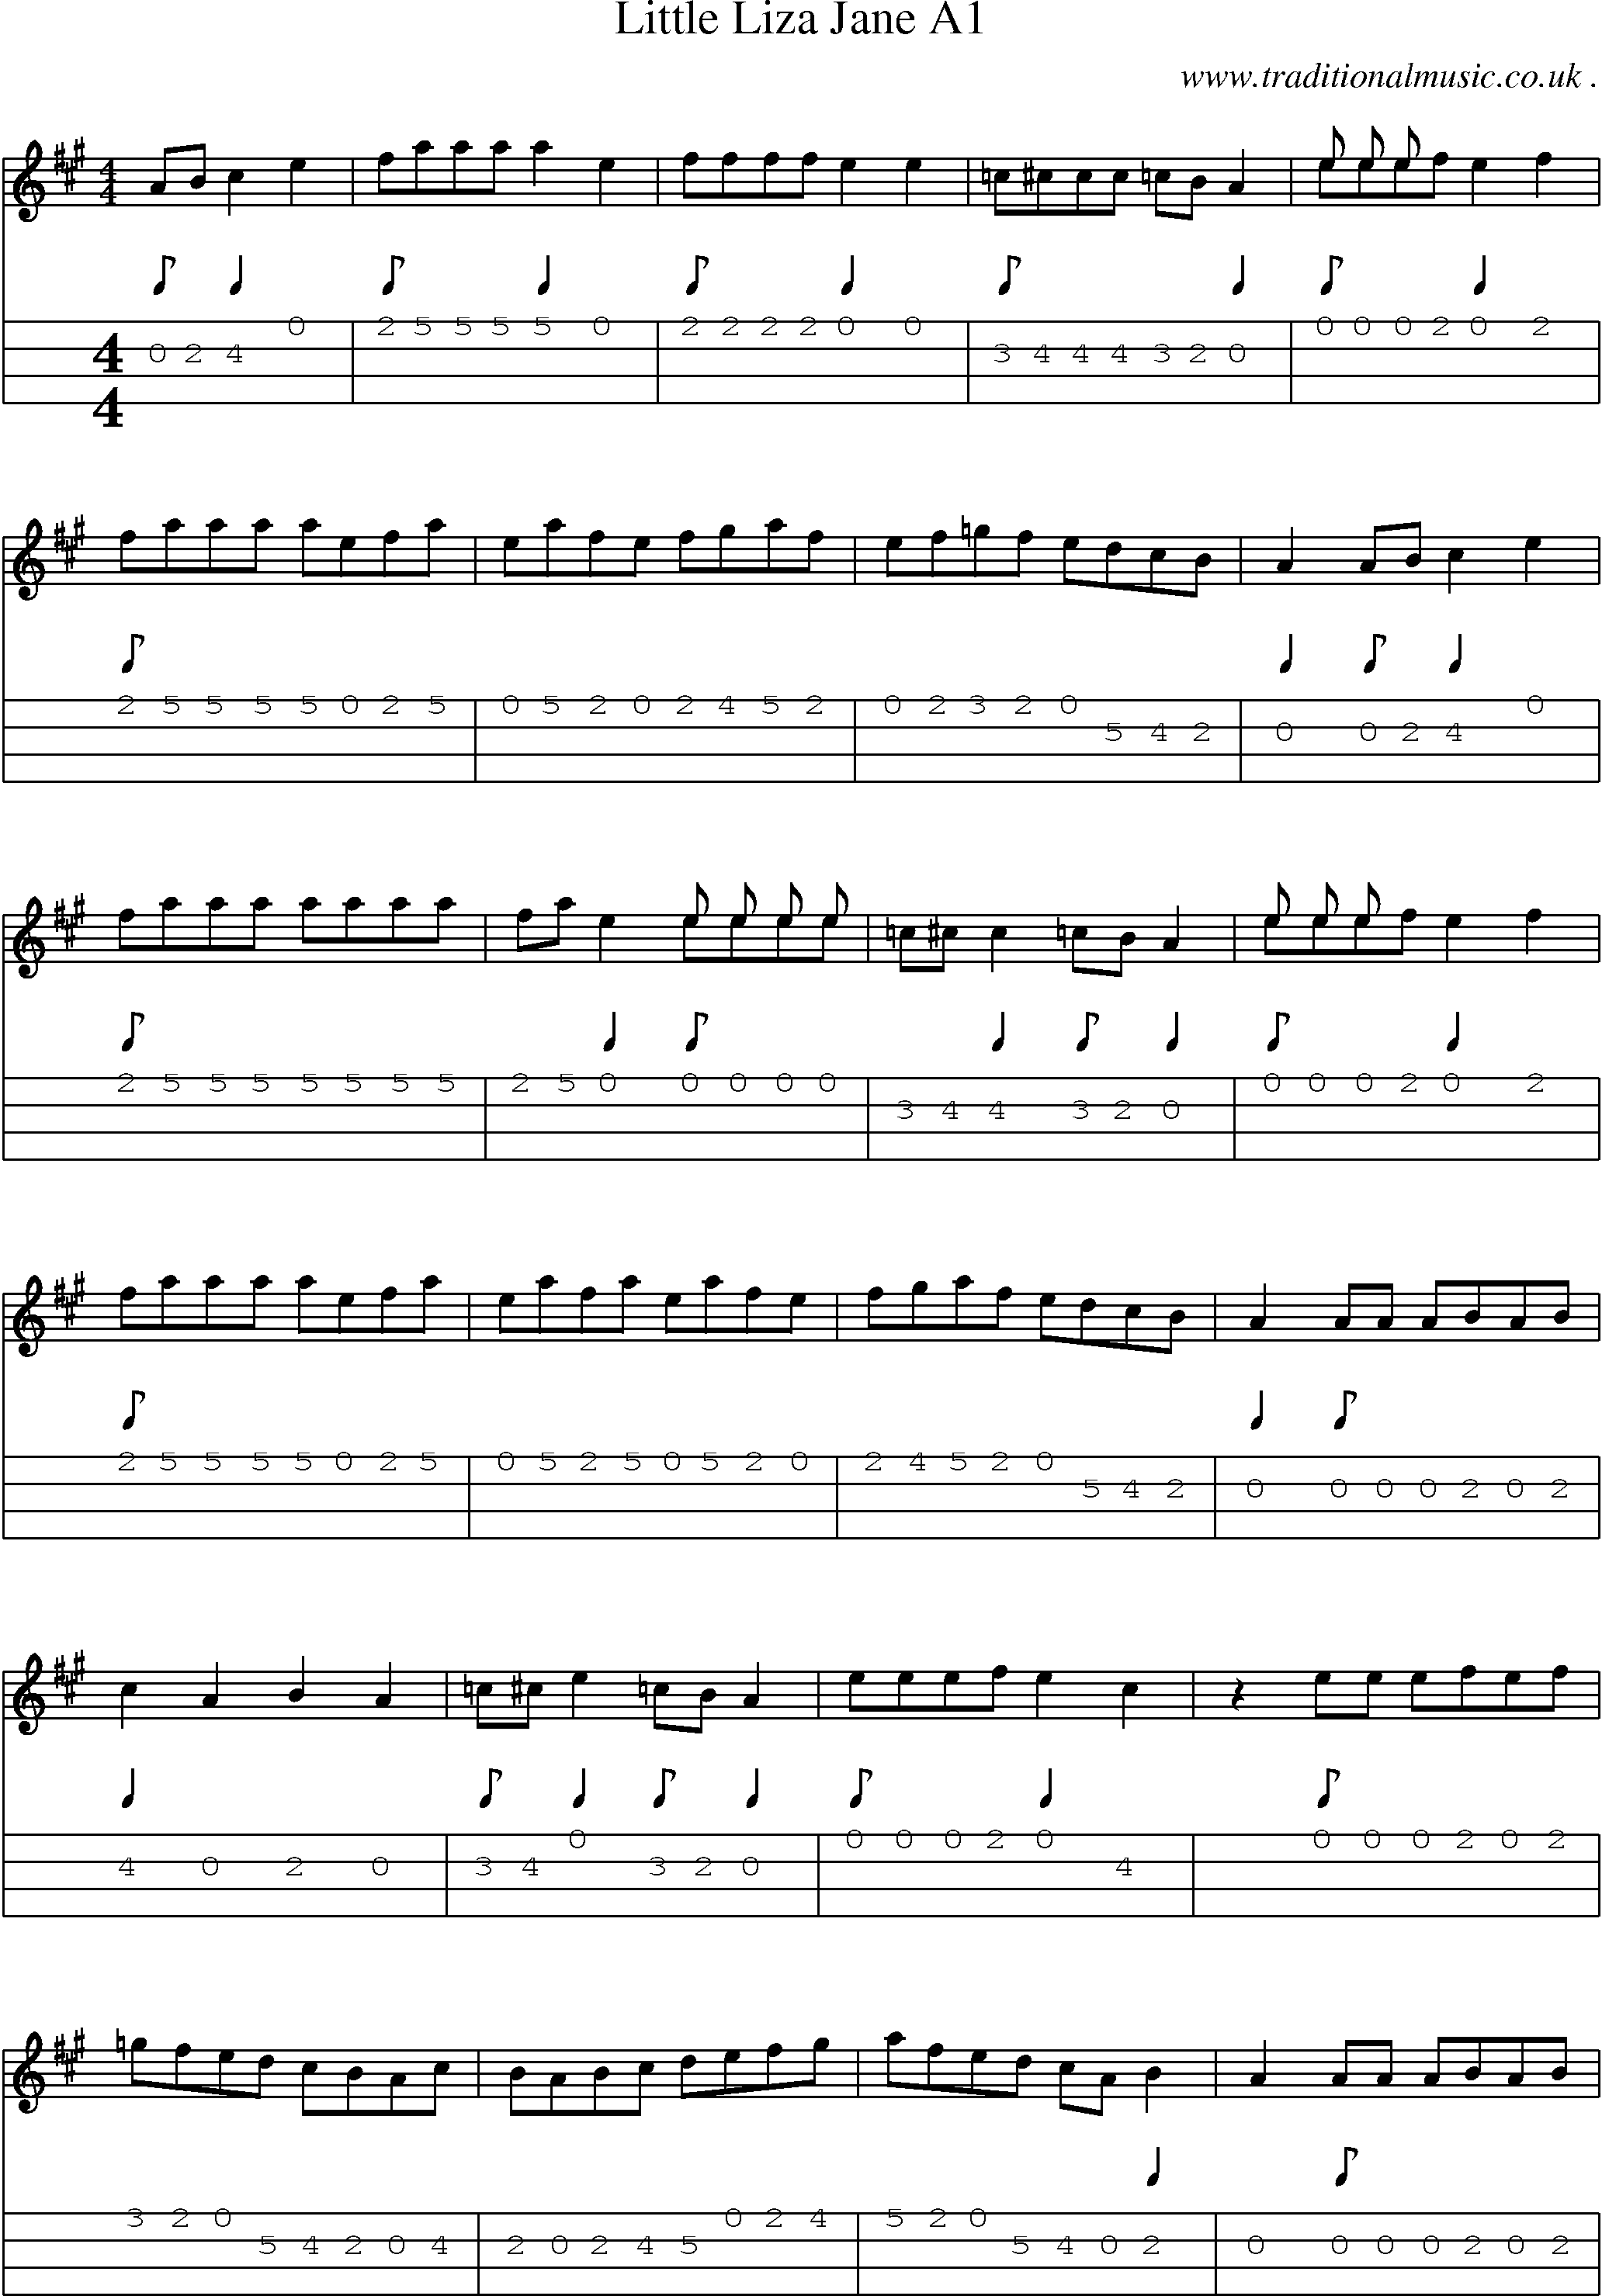 Music Score and Guitar Tabs for Little Liza Jane 1